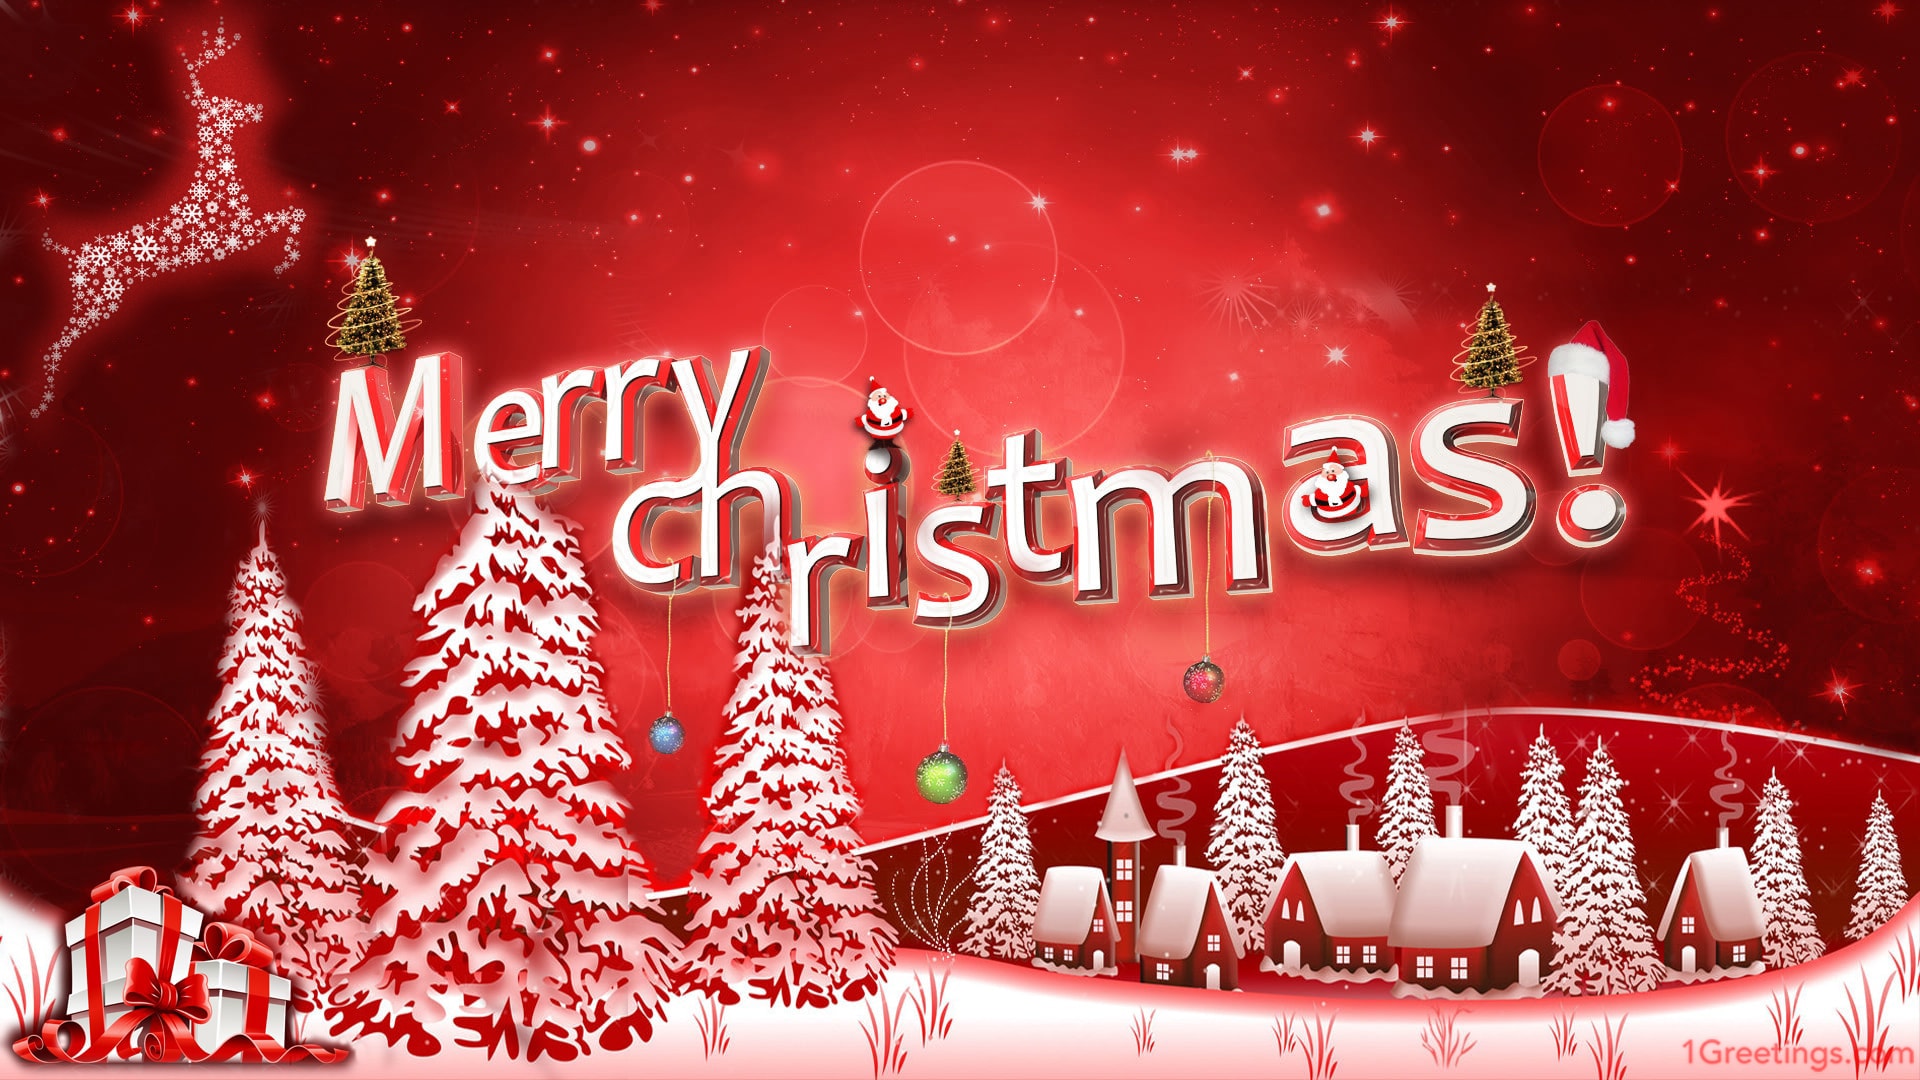 Merry Christmas Wallpaper Full HD Free Download - Images 11